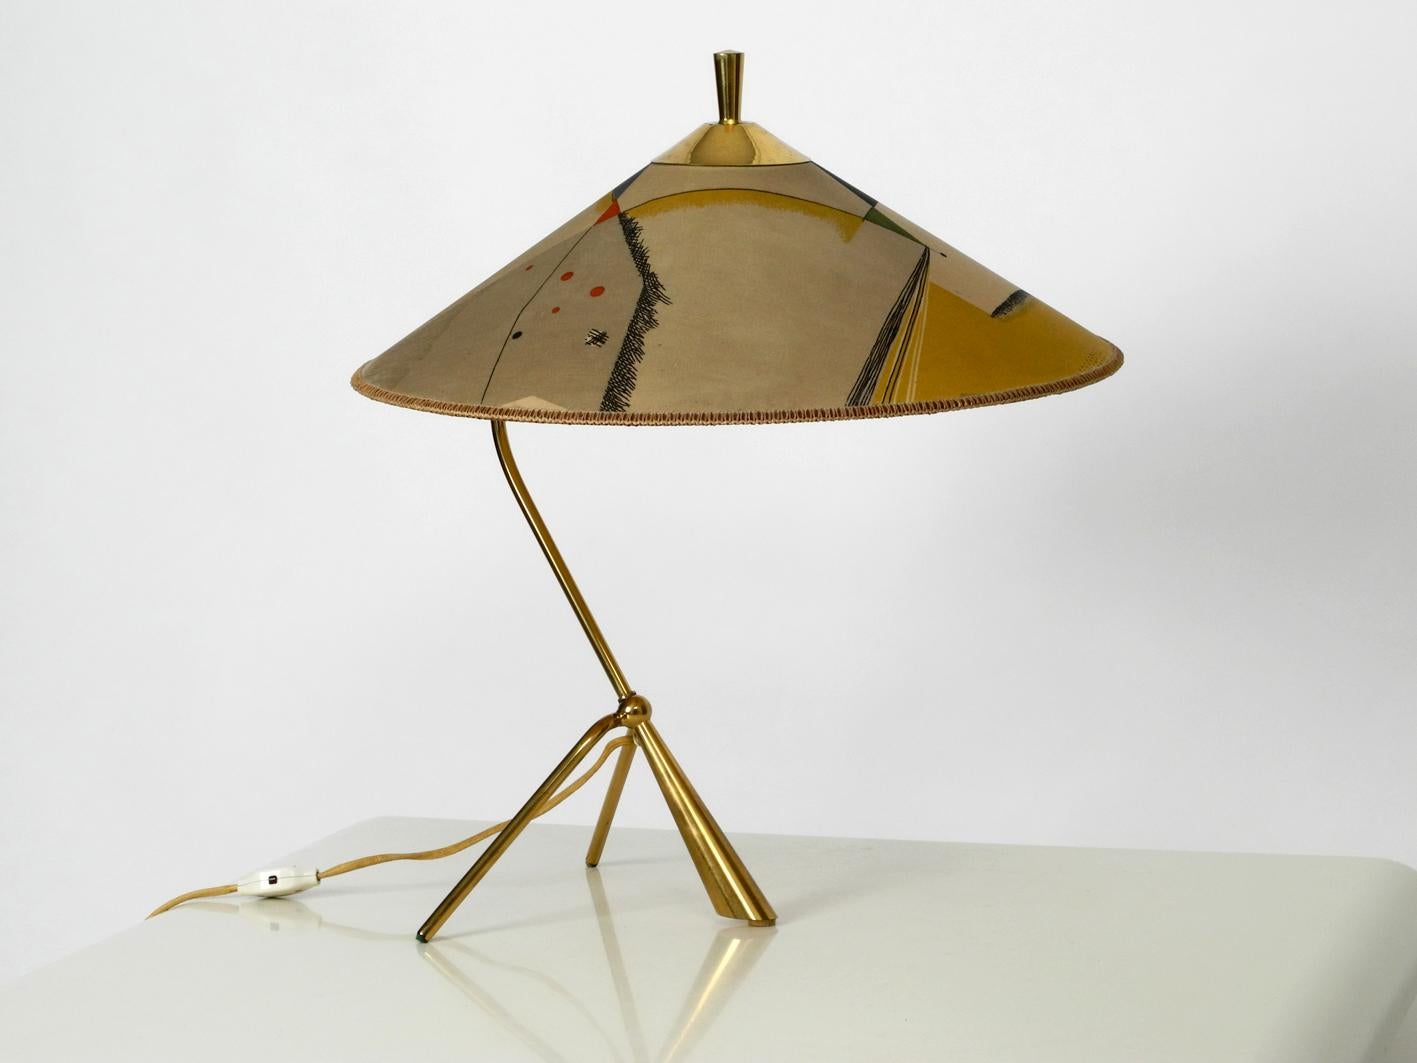 Beautiful very rare extra extra large Mid-Century Modern brass table lamp with original fabric shade. Made by Kalmar in the 1950s. Made in Austria. Very large original lampshade in very good condition.
Very nice typically striking midcentury design